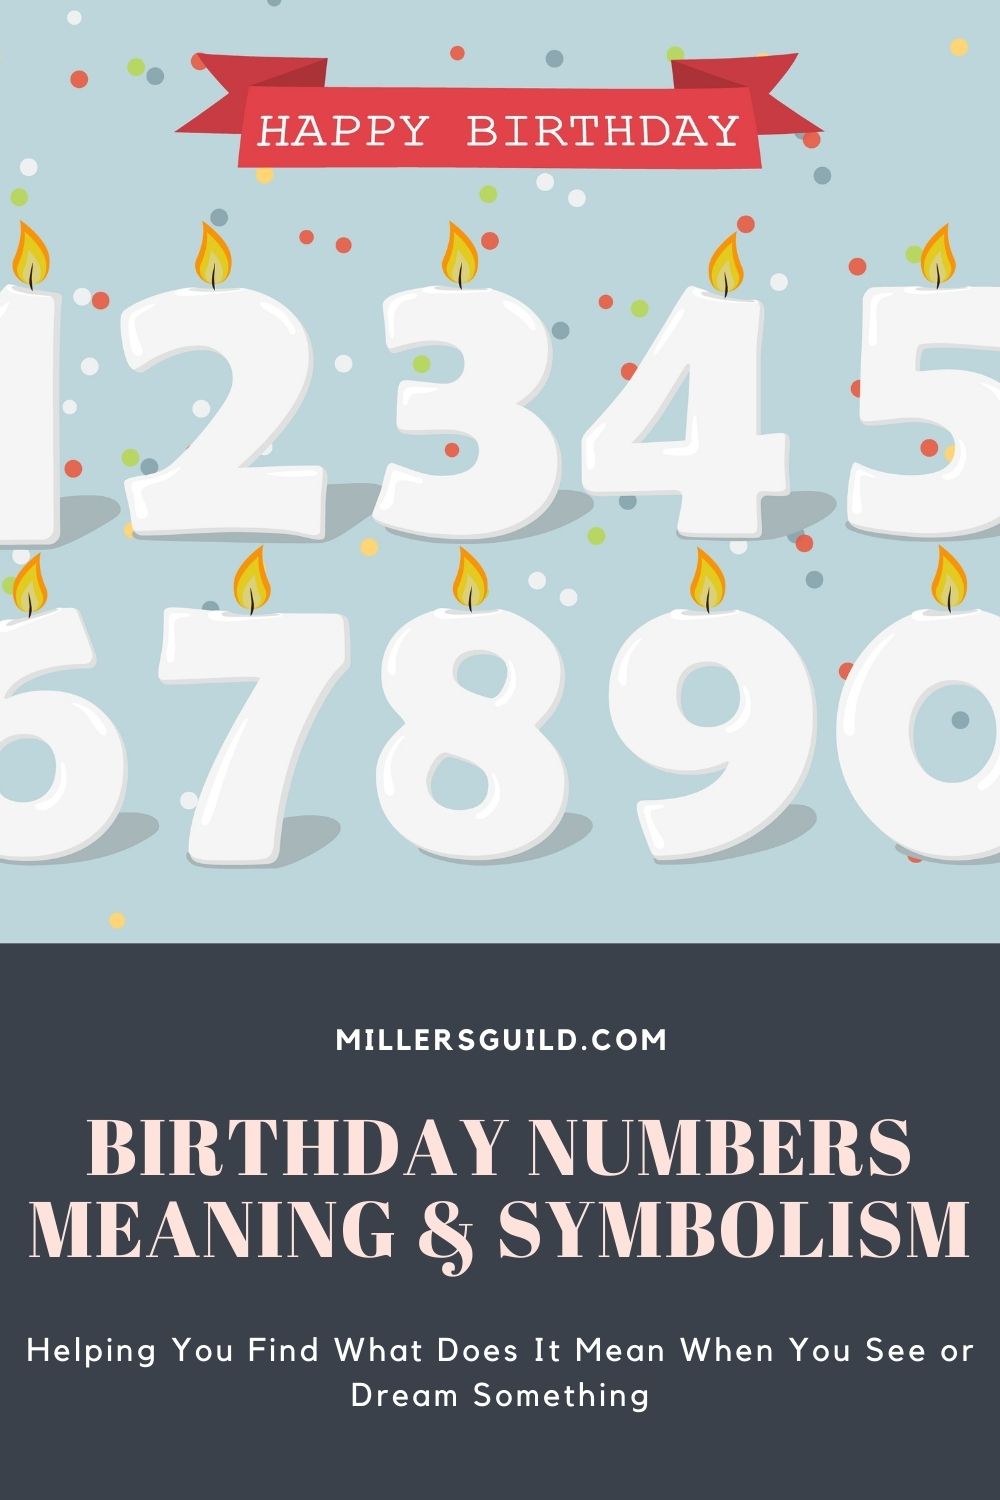 Birthday Numbers Meaning & Symbolism 2